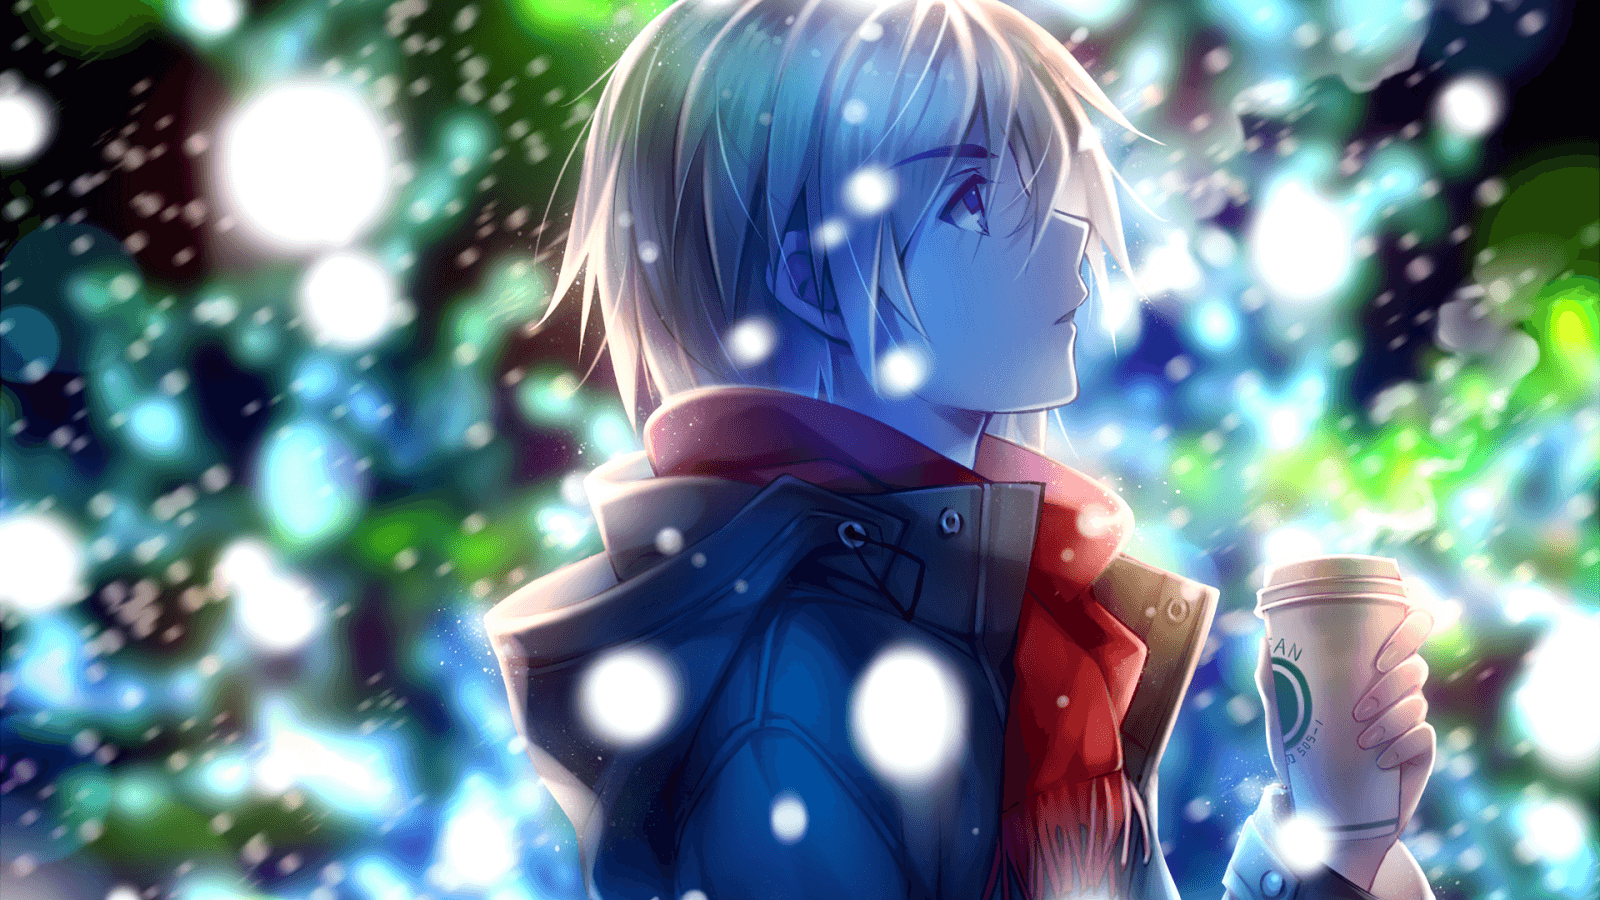 Download 1600x900 Anime Boy, Profile View, Red Scarf, Winter